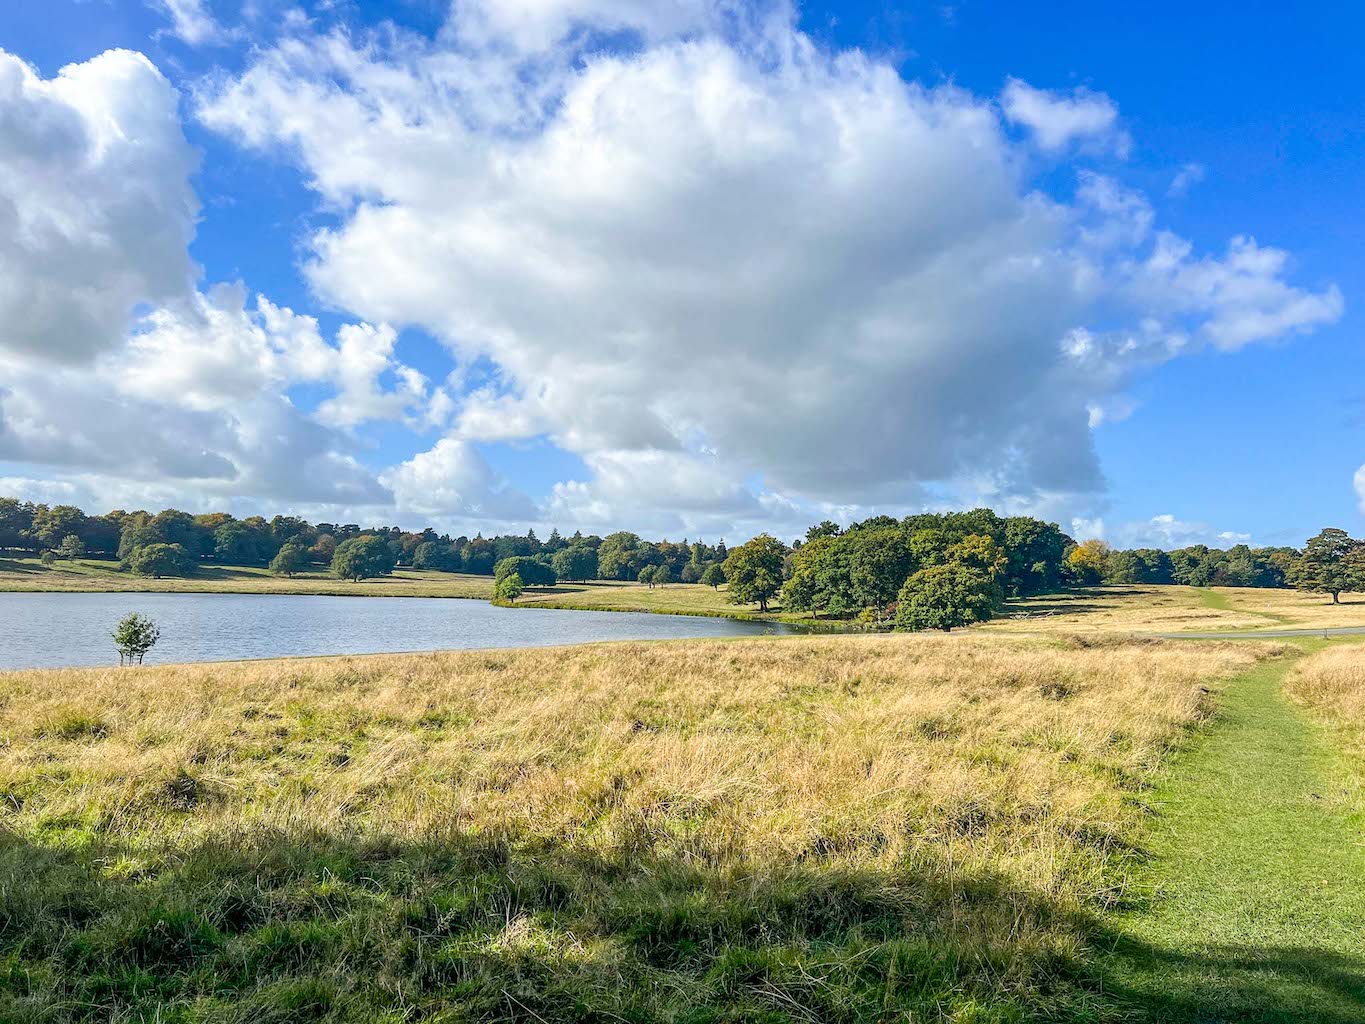 Things to do in Altrincham, Lake and field at Tatton Park near Altrincham